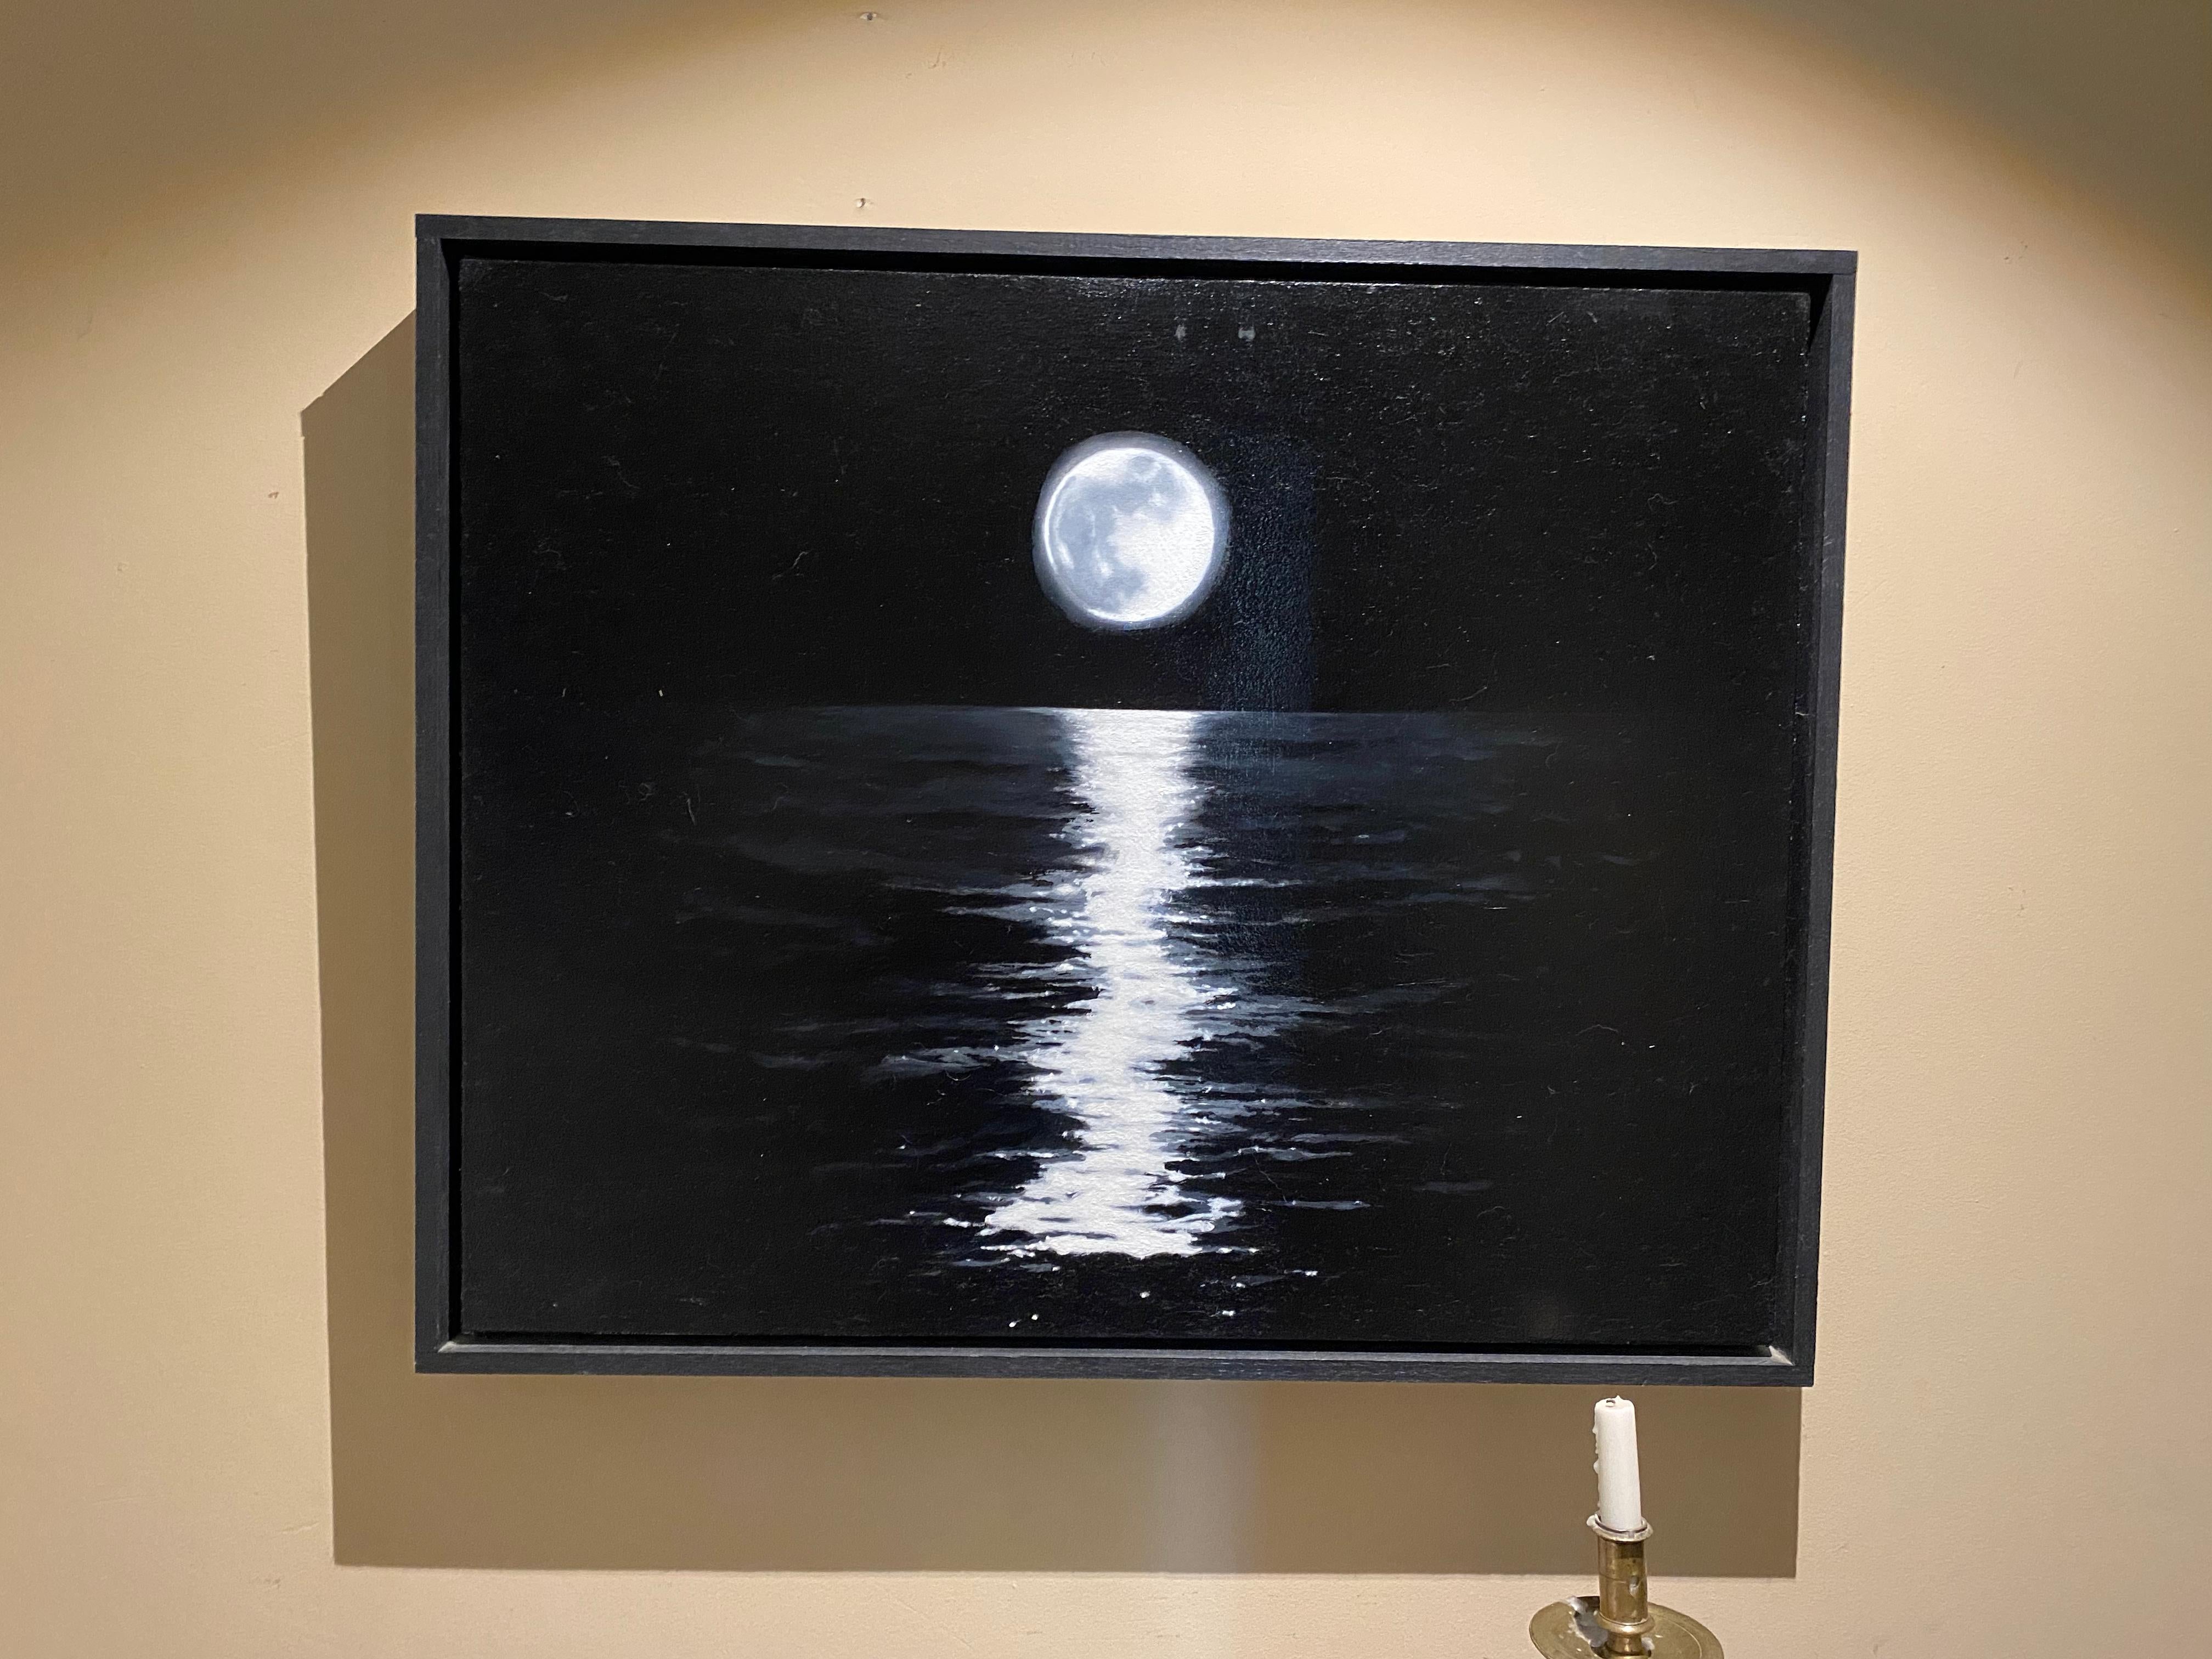 Oil painting of the moon, by late artiste David Cox, the painting is a powerful suggestion of the moon rising over a large body of water, the painting is captivating and very unique, the frame was done by the artist himself.